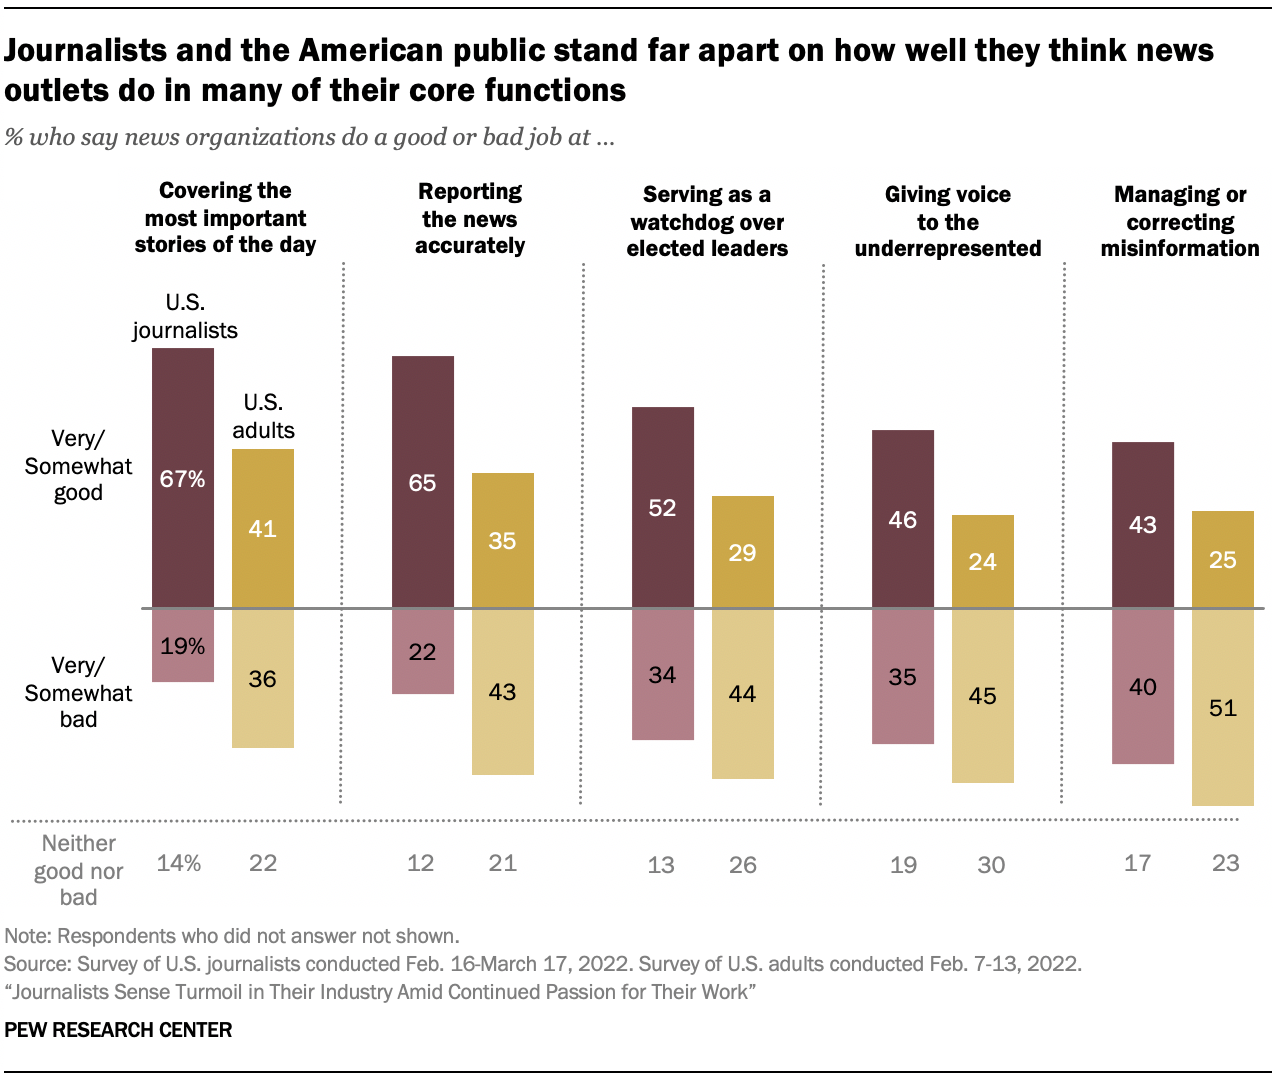 A chart showing that Journalists and the American public stand far apart on how well they think news outlets do in many of their core functions